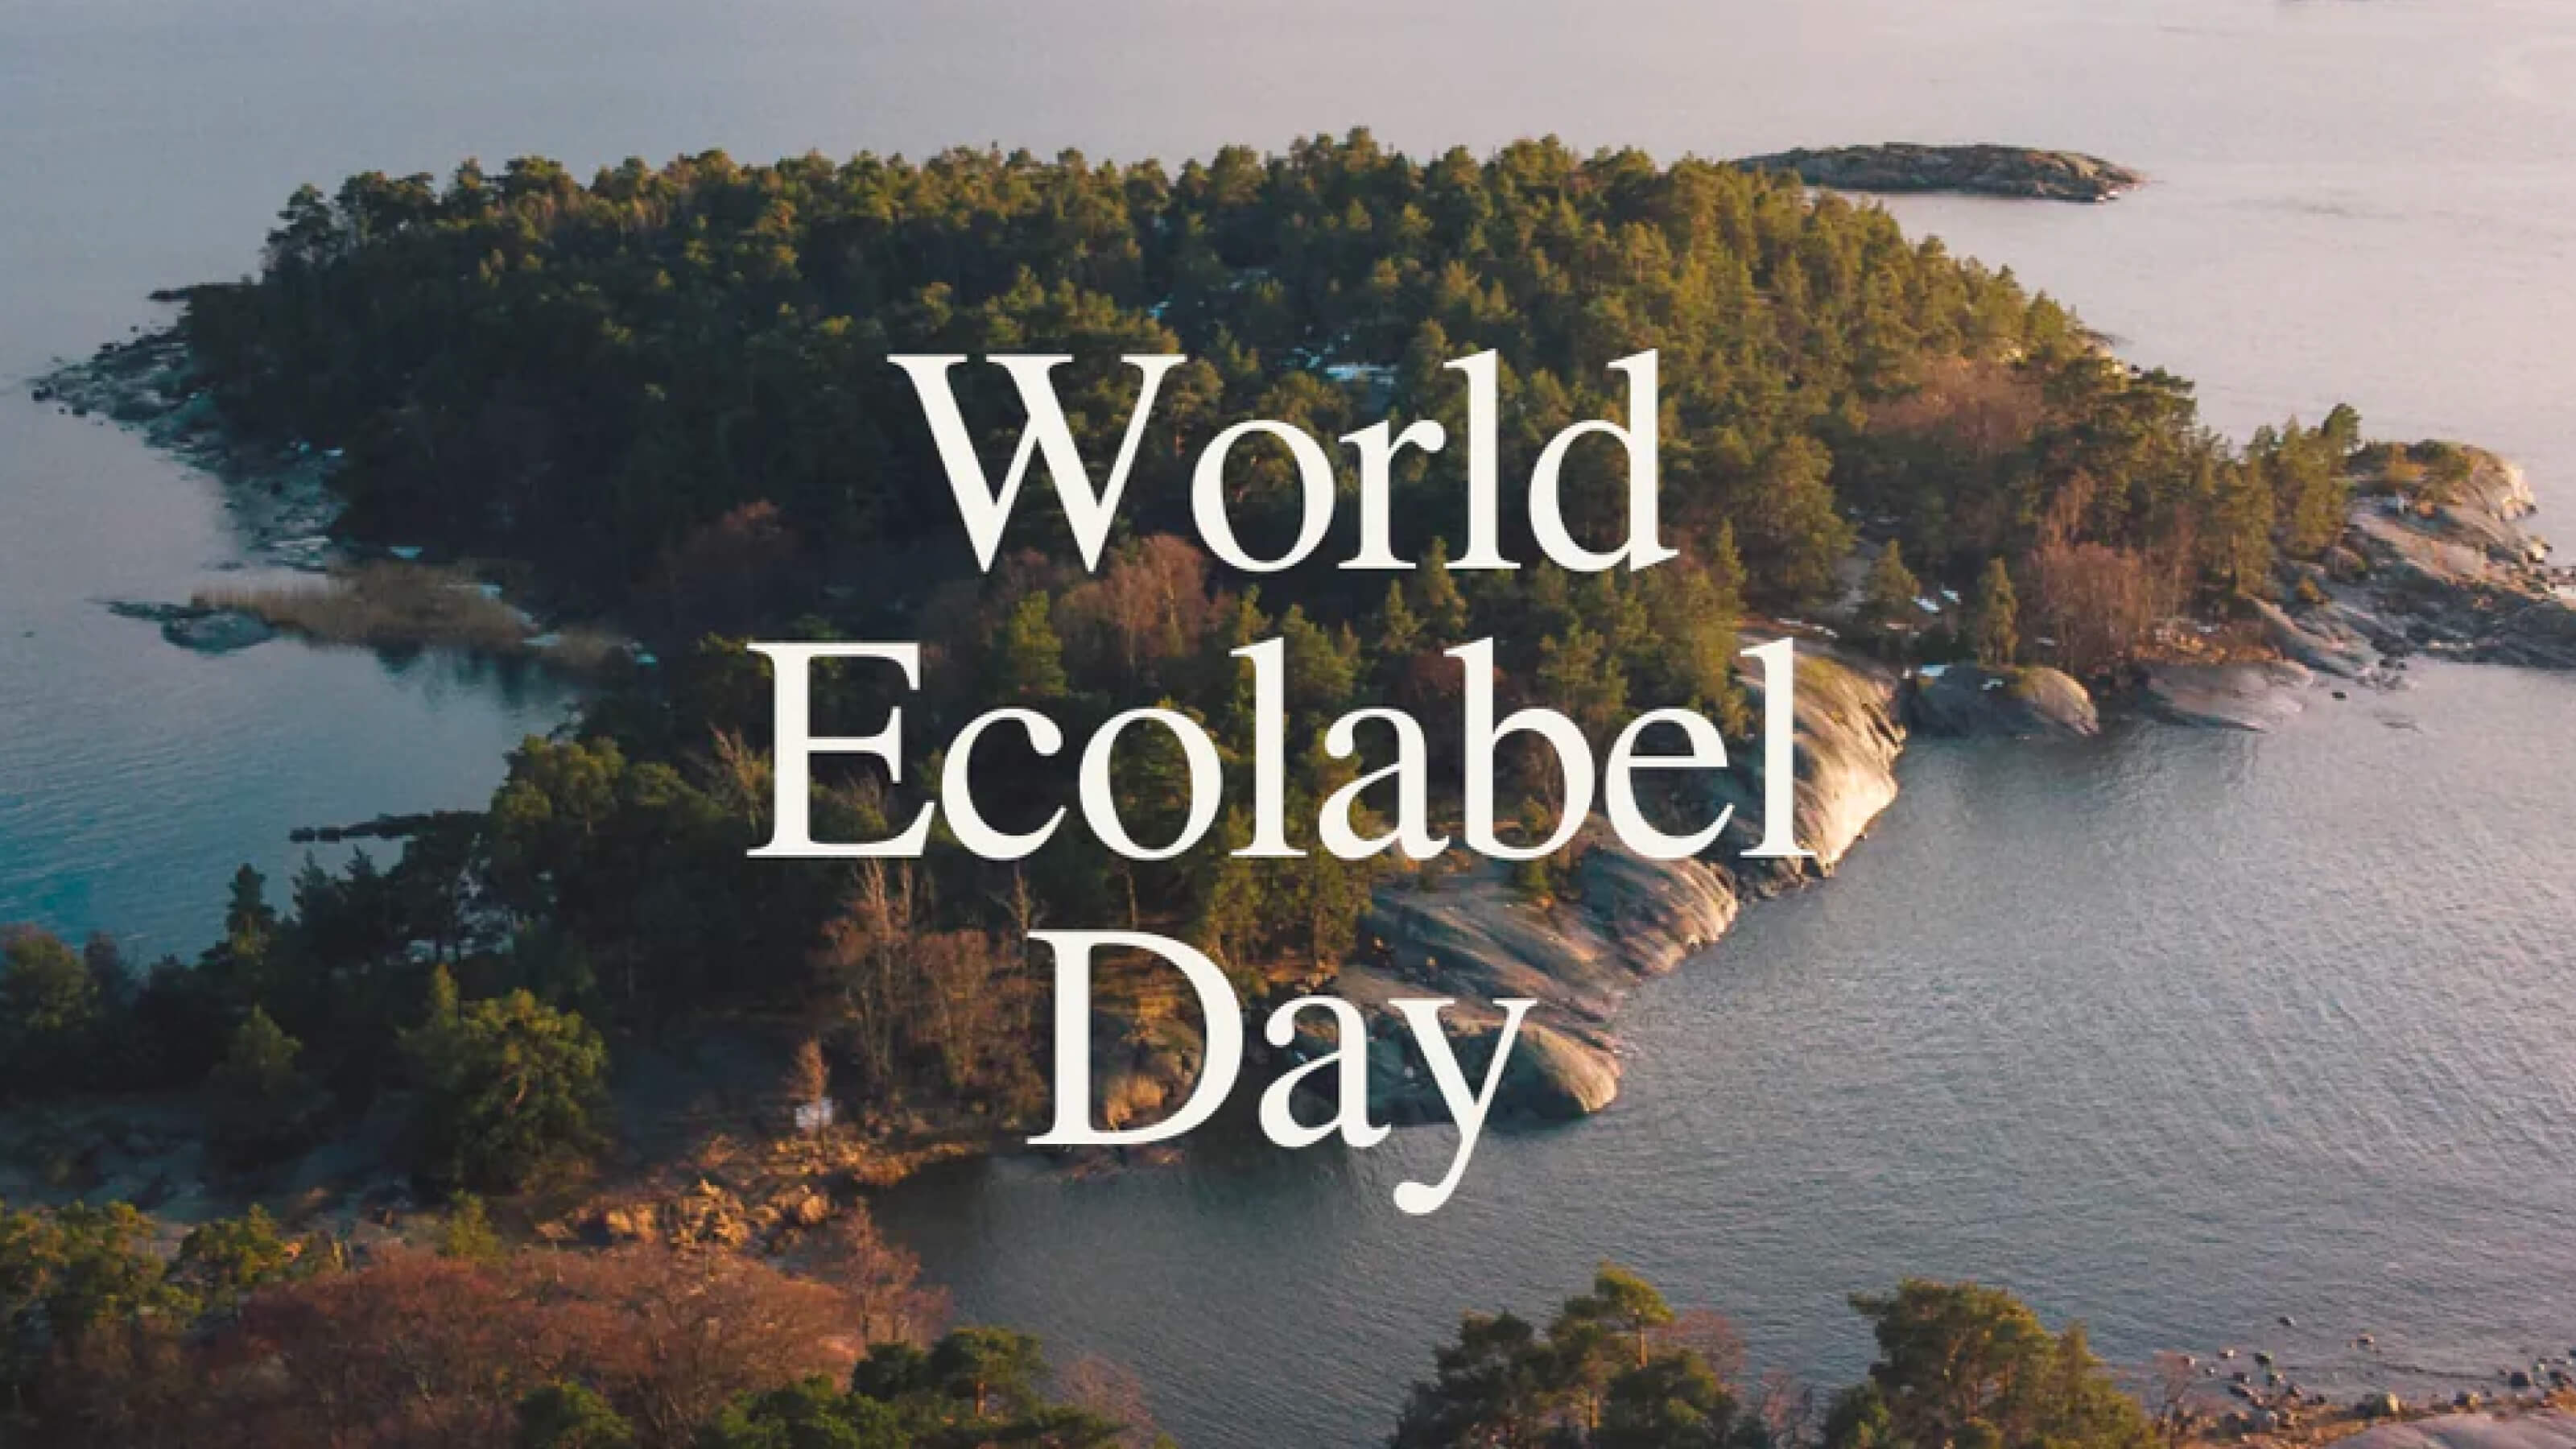 World Ecolabel Day - Beauty and responsibility can go hand in hand